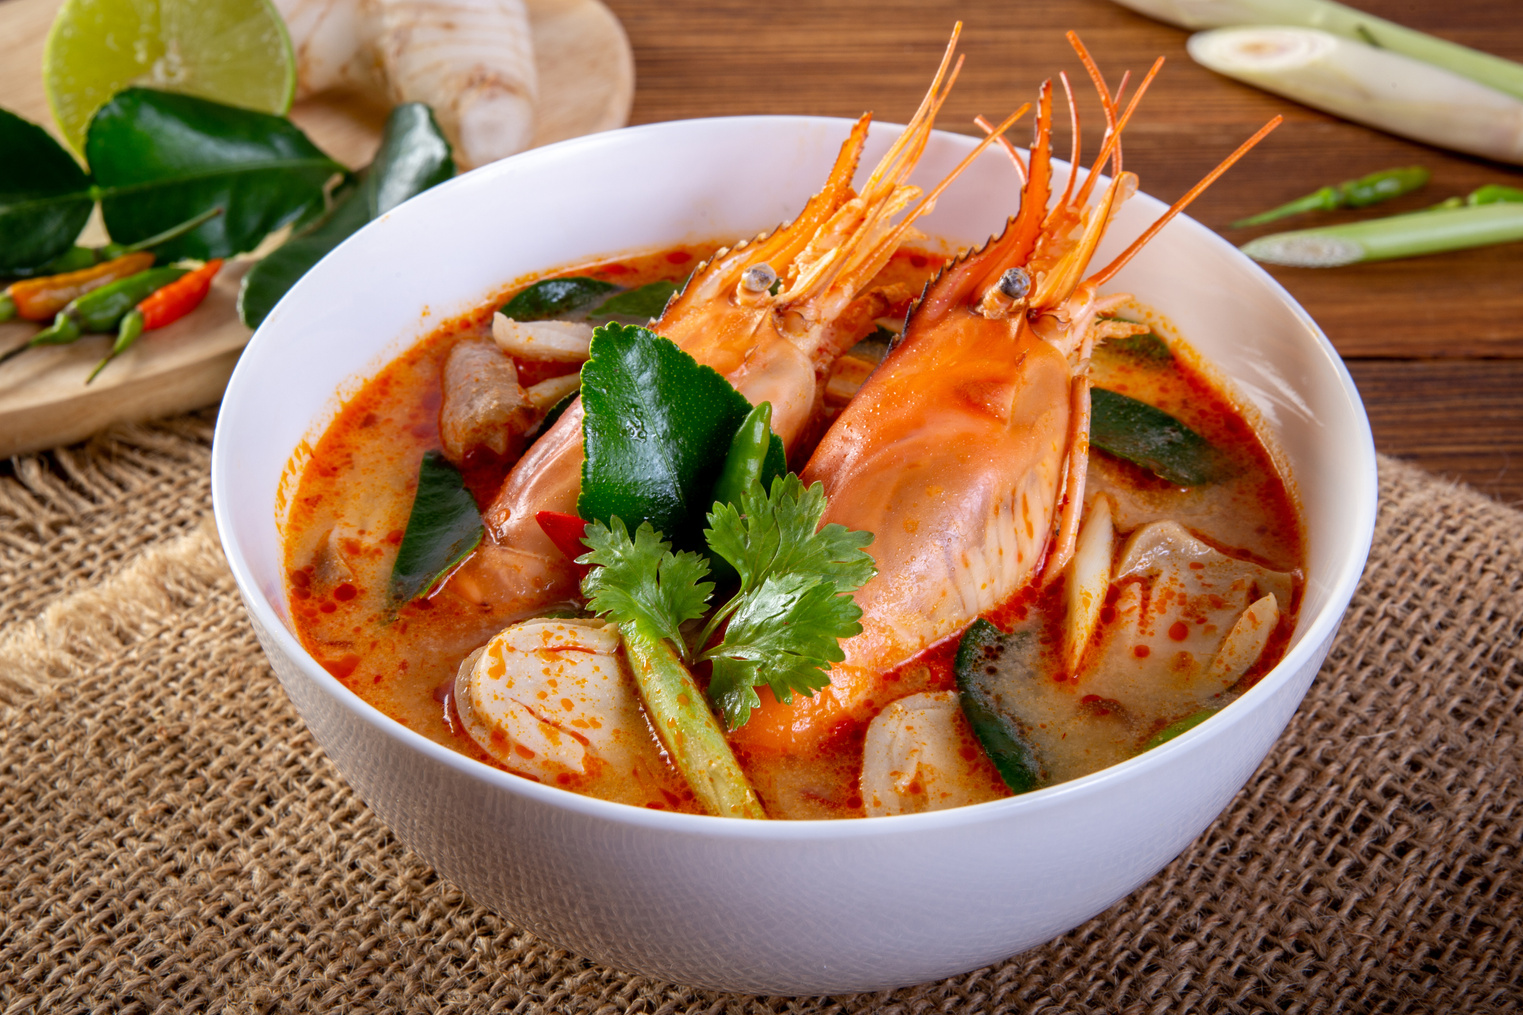 Tom Yam Kung Is a Spicy Clear Soup Typical in Thailand